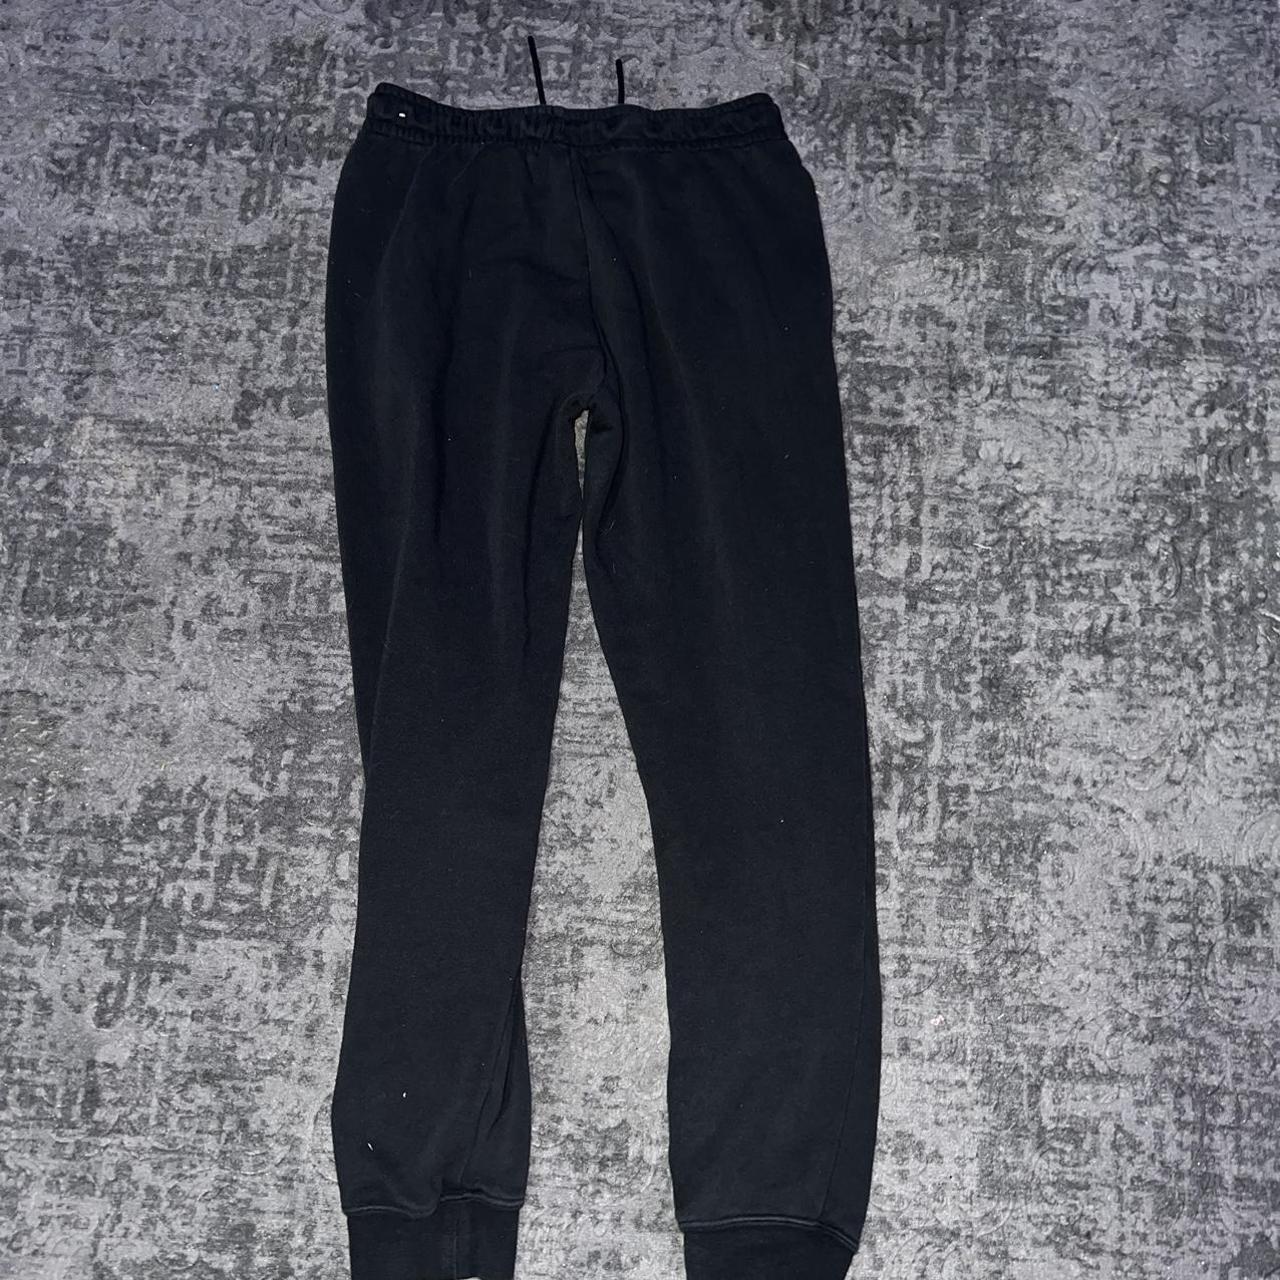 Nike Women's Black and White Joggers-tracksuits (2)